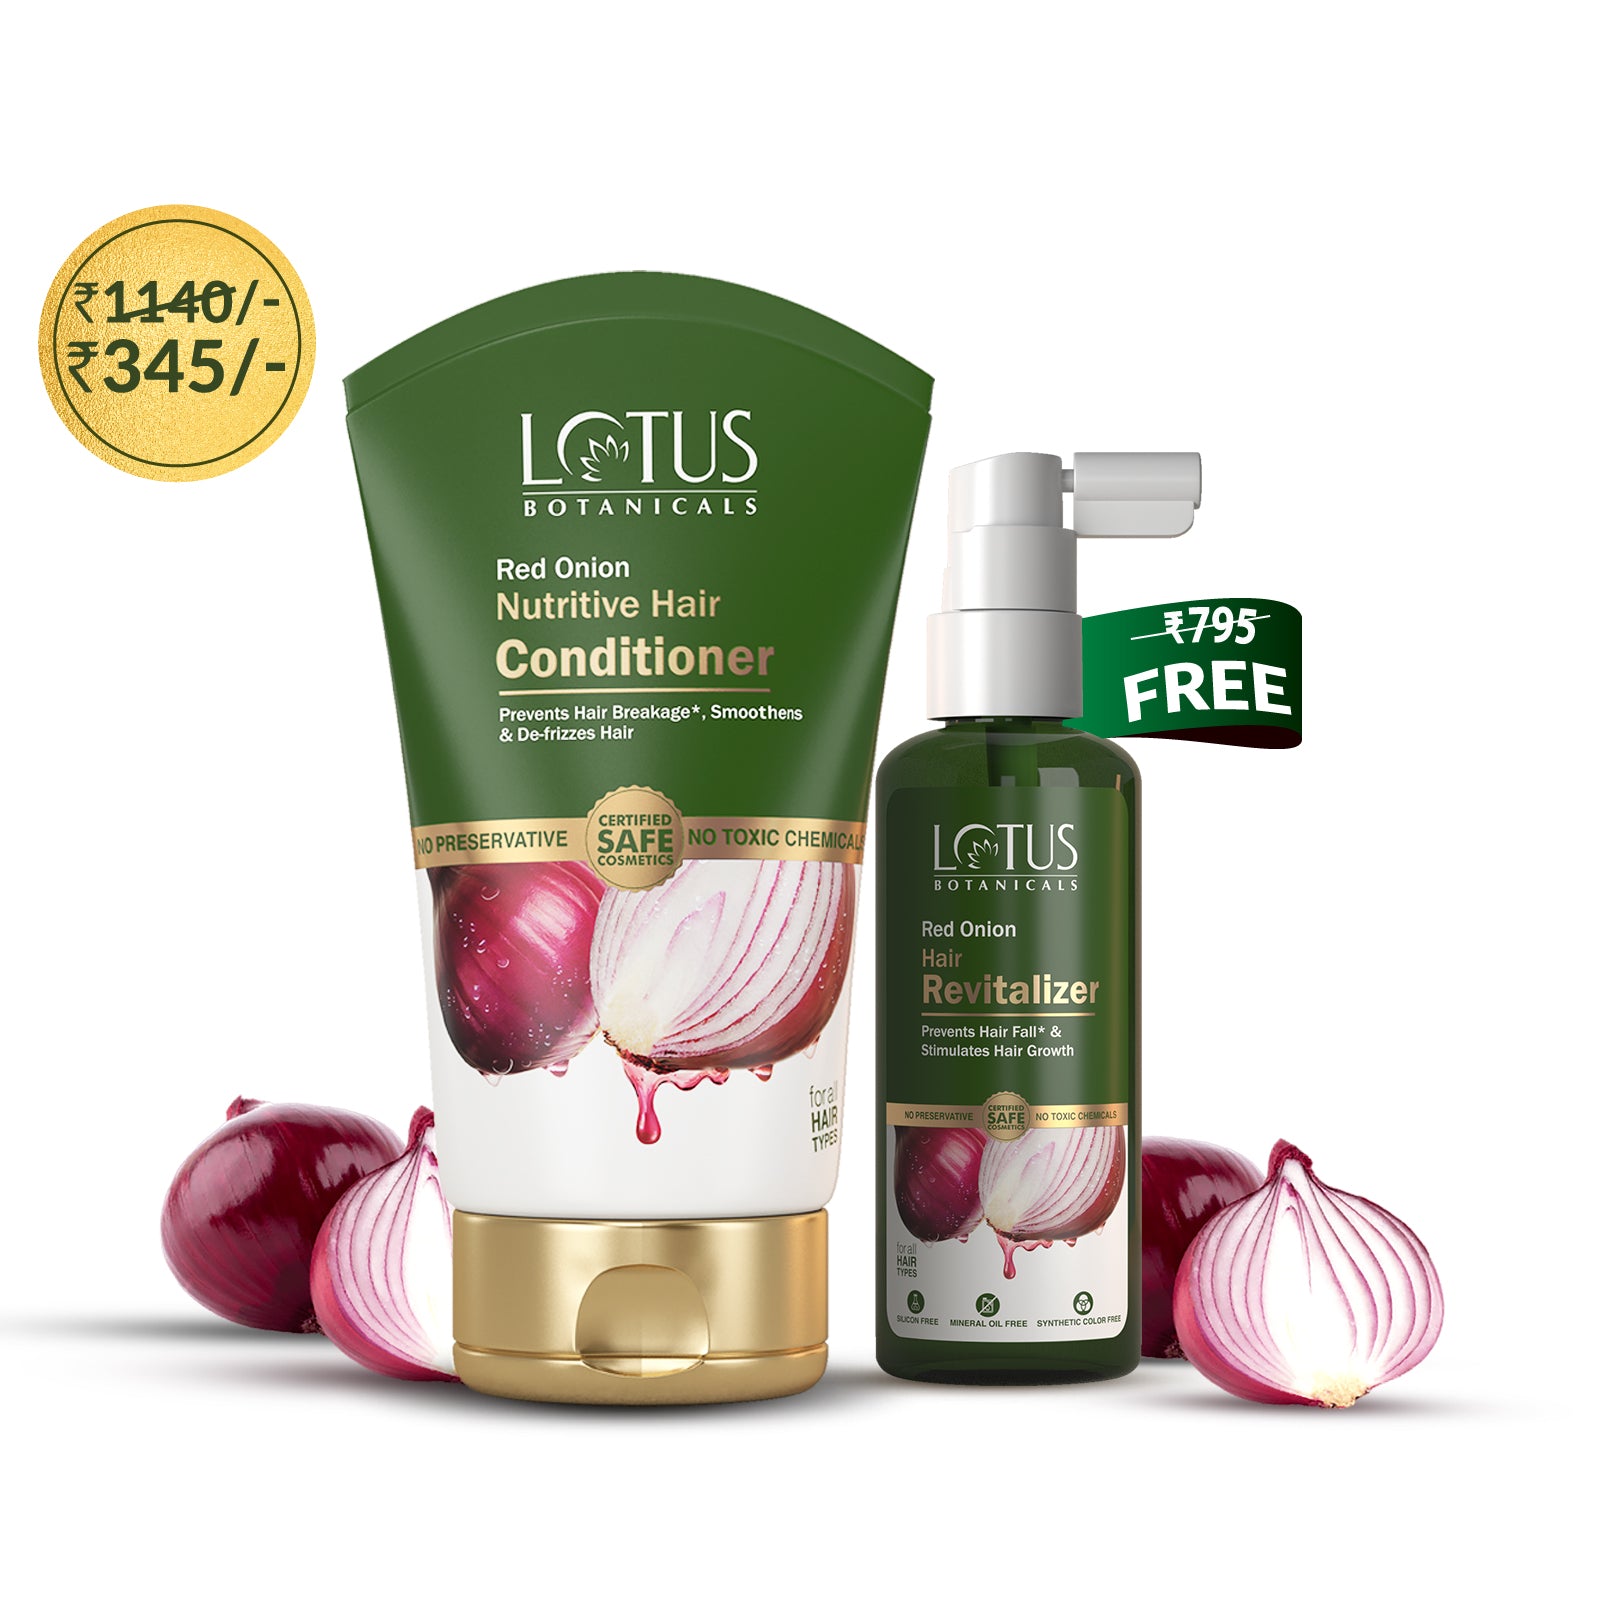 Buy Red Onion Conditioner, Get Hair Revitalizer Free